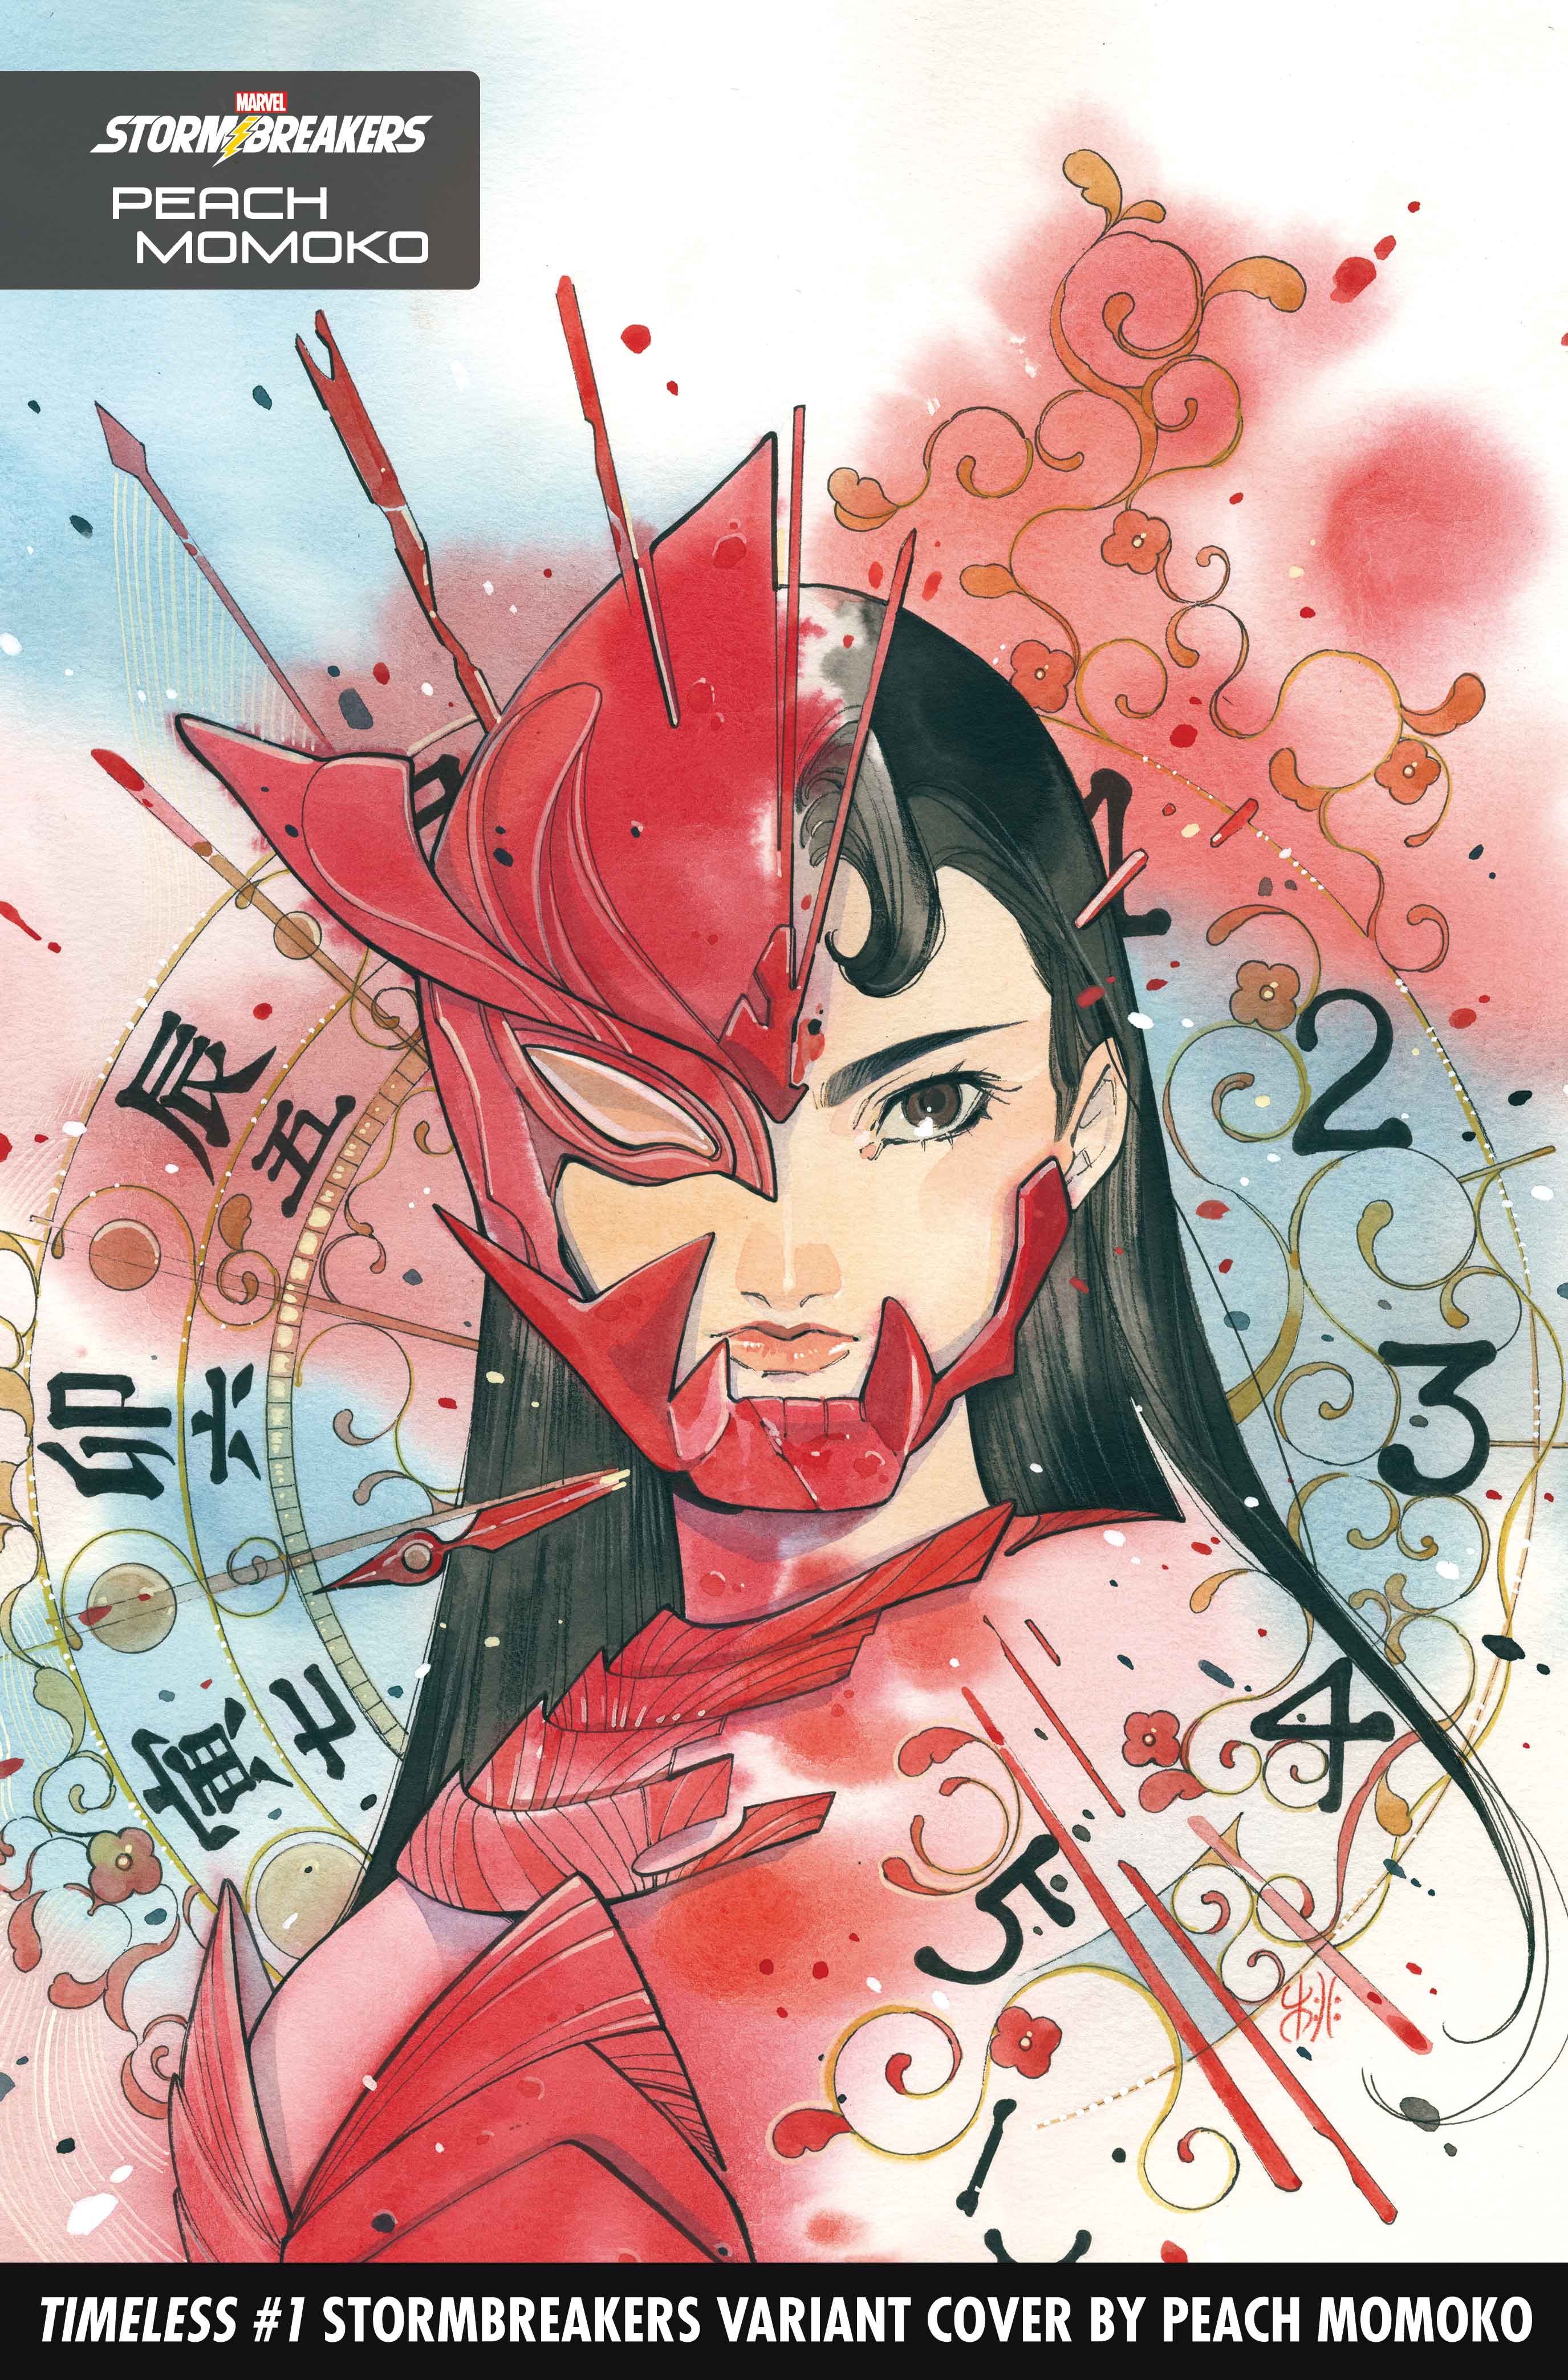 Elektra on the cover of Timeless 1 Stormbreakers variant by Peach Momoko